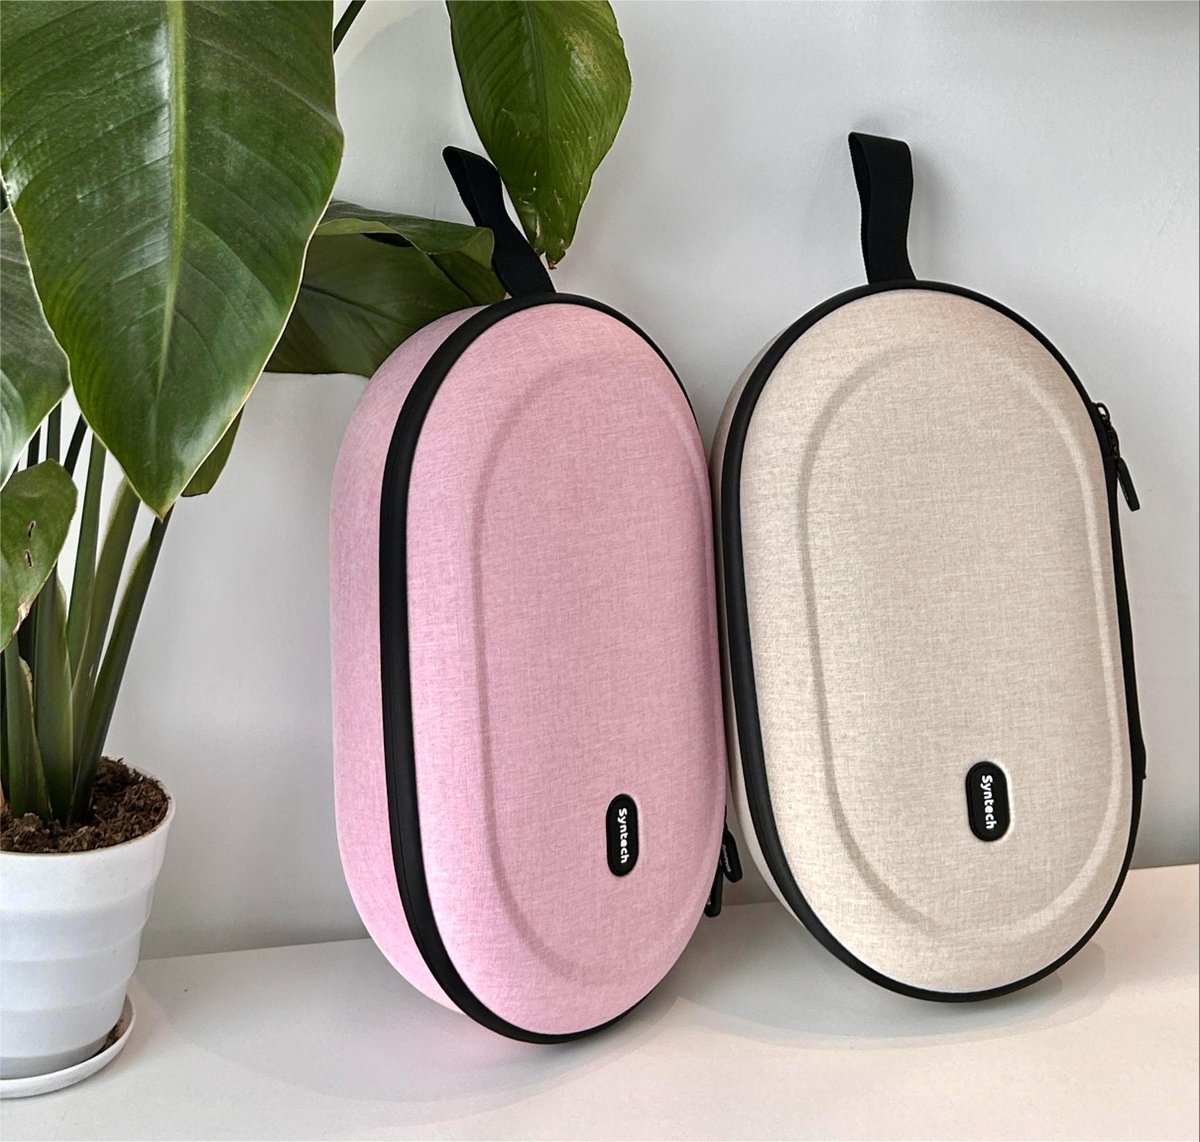 Lighter color lighter life!
Our new color of VR carrying case is coming soon!

#vr #syntech #syntechcarrycase #vrcarrycase #carrybag #vraccessory #vroutdoor #vrcarrybag #newcolors #pink #CreamColor #NewLaunches #vrgames #vrgaming